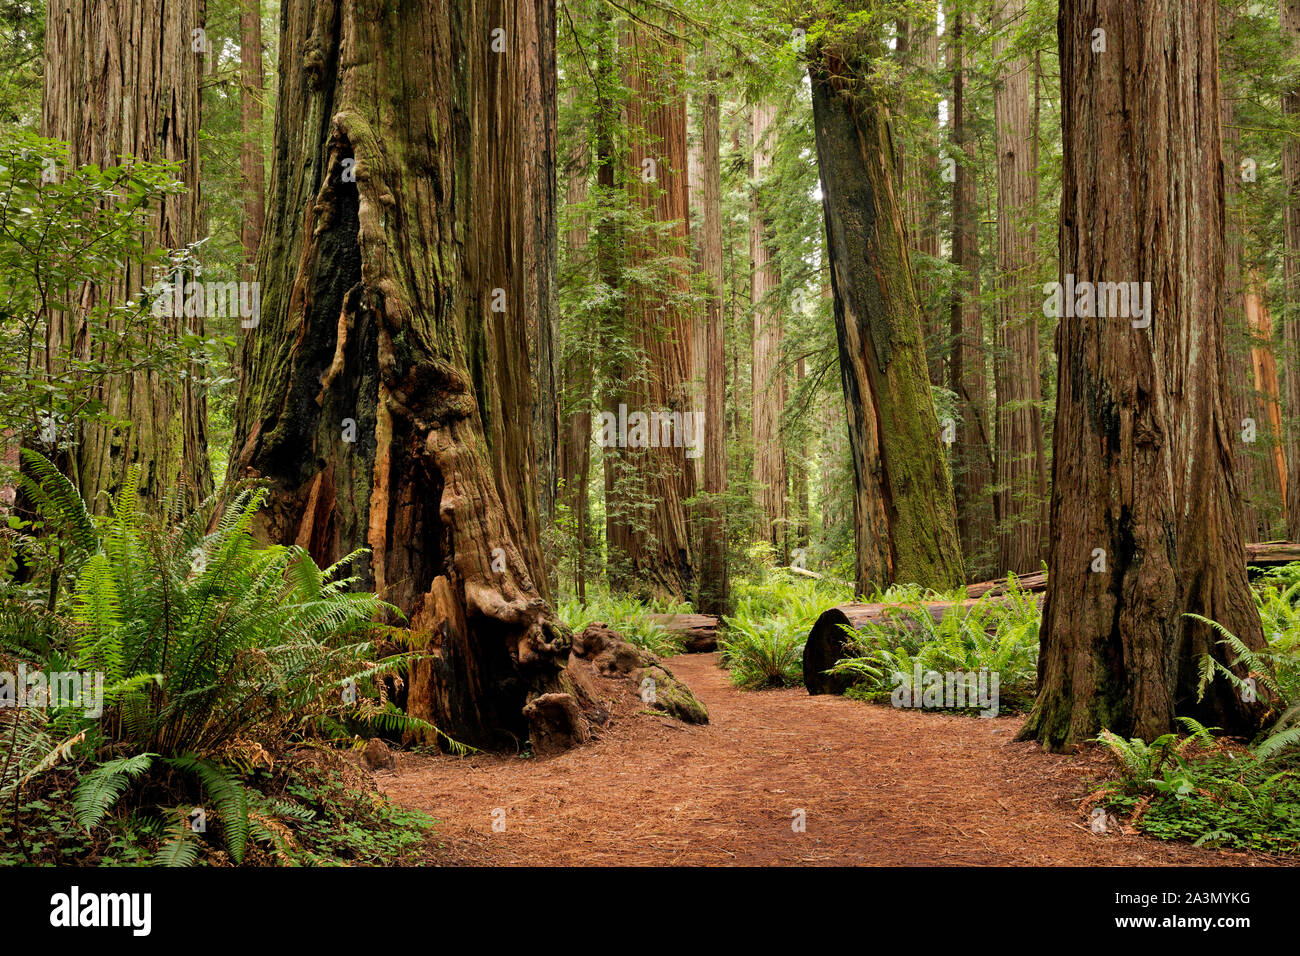 CA03633-00...CALIFORNIA - Loop trail through the redwood trees through Stout Grove in the Jedediah Smith Redwoods State Park. Stock Photo